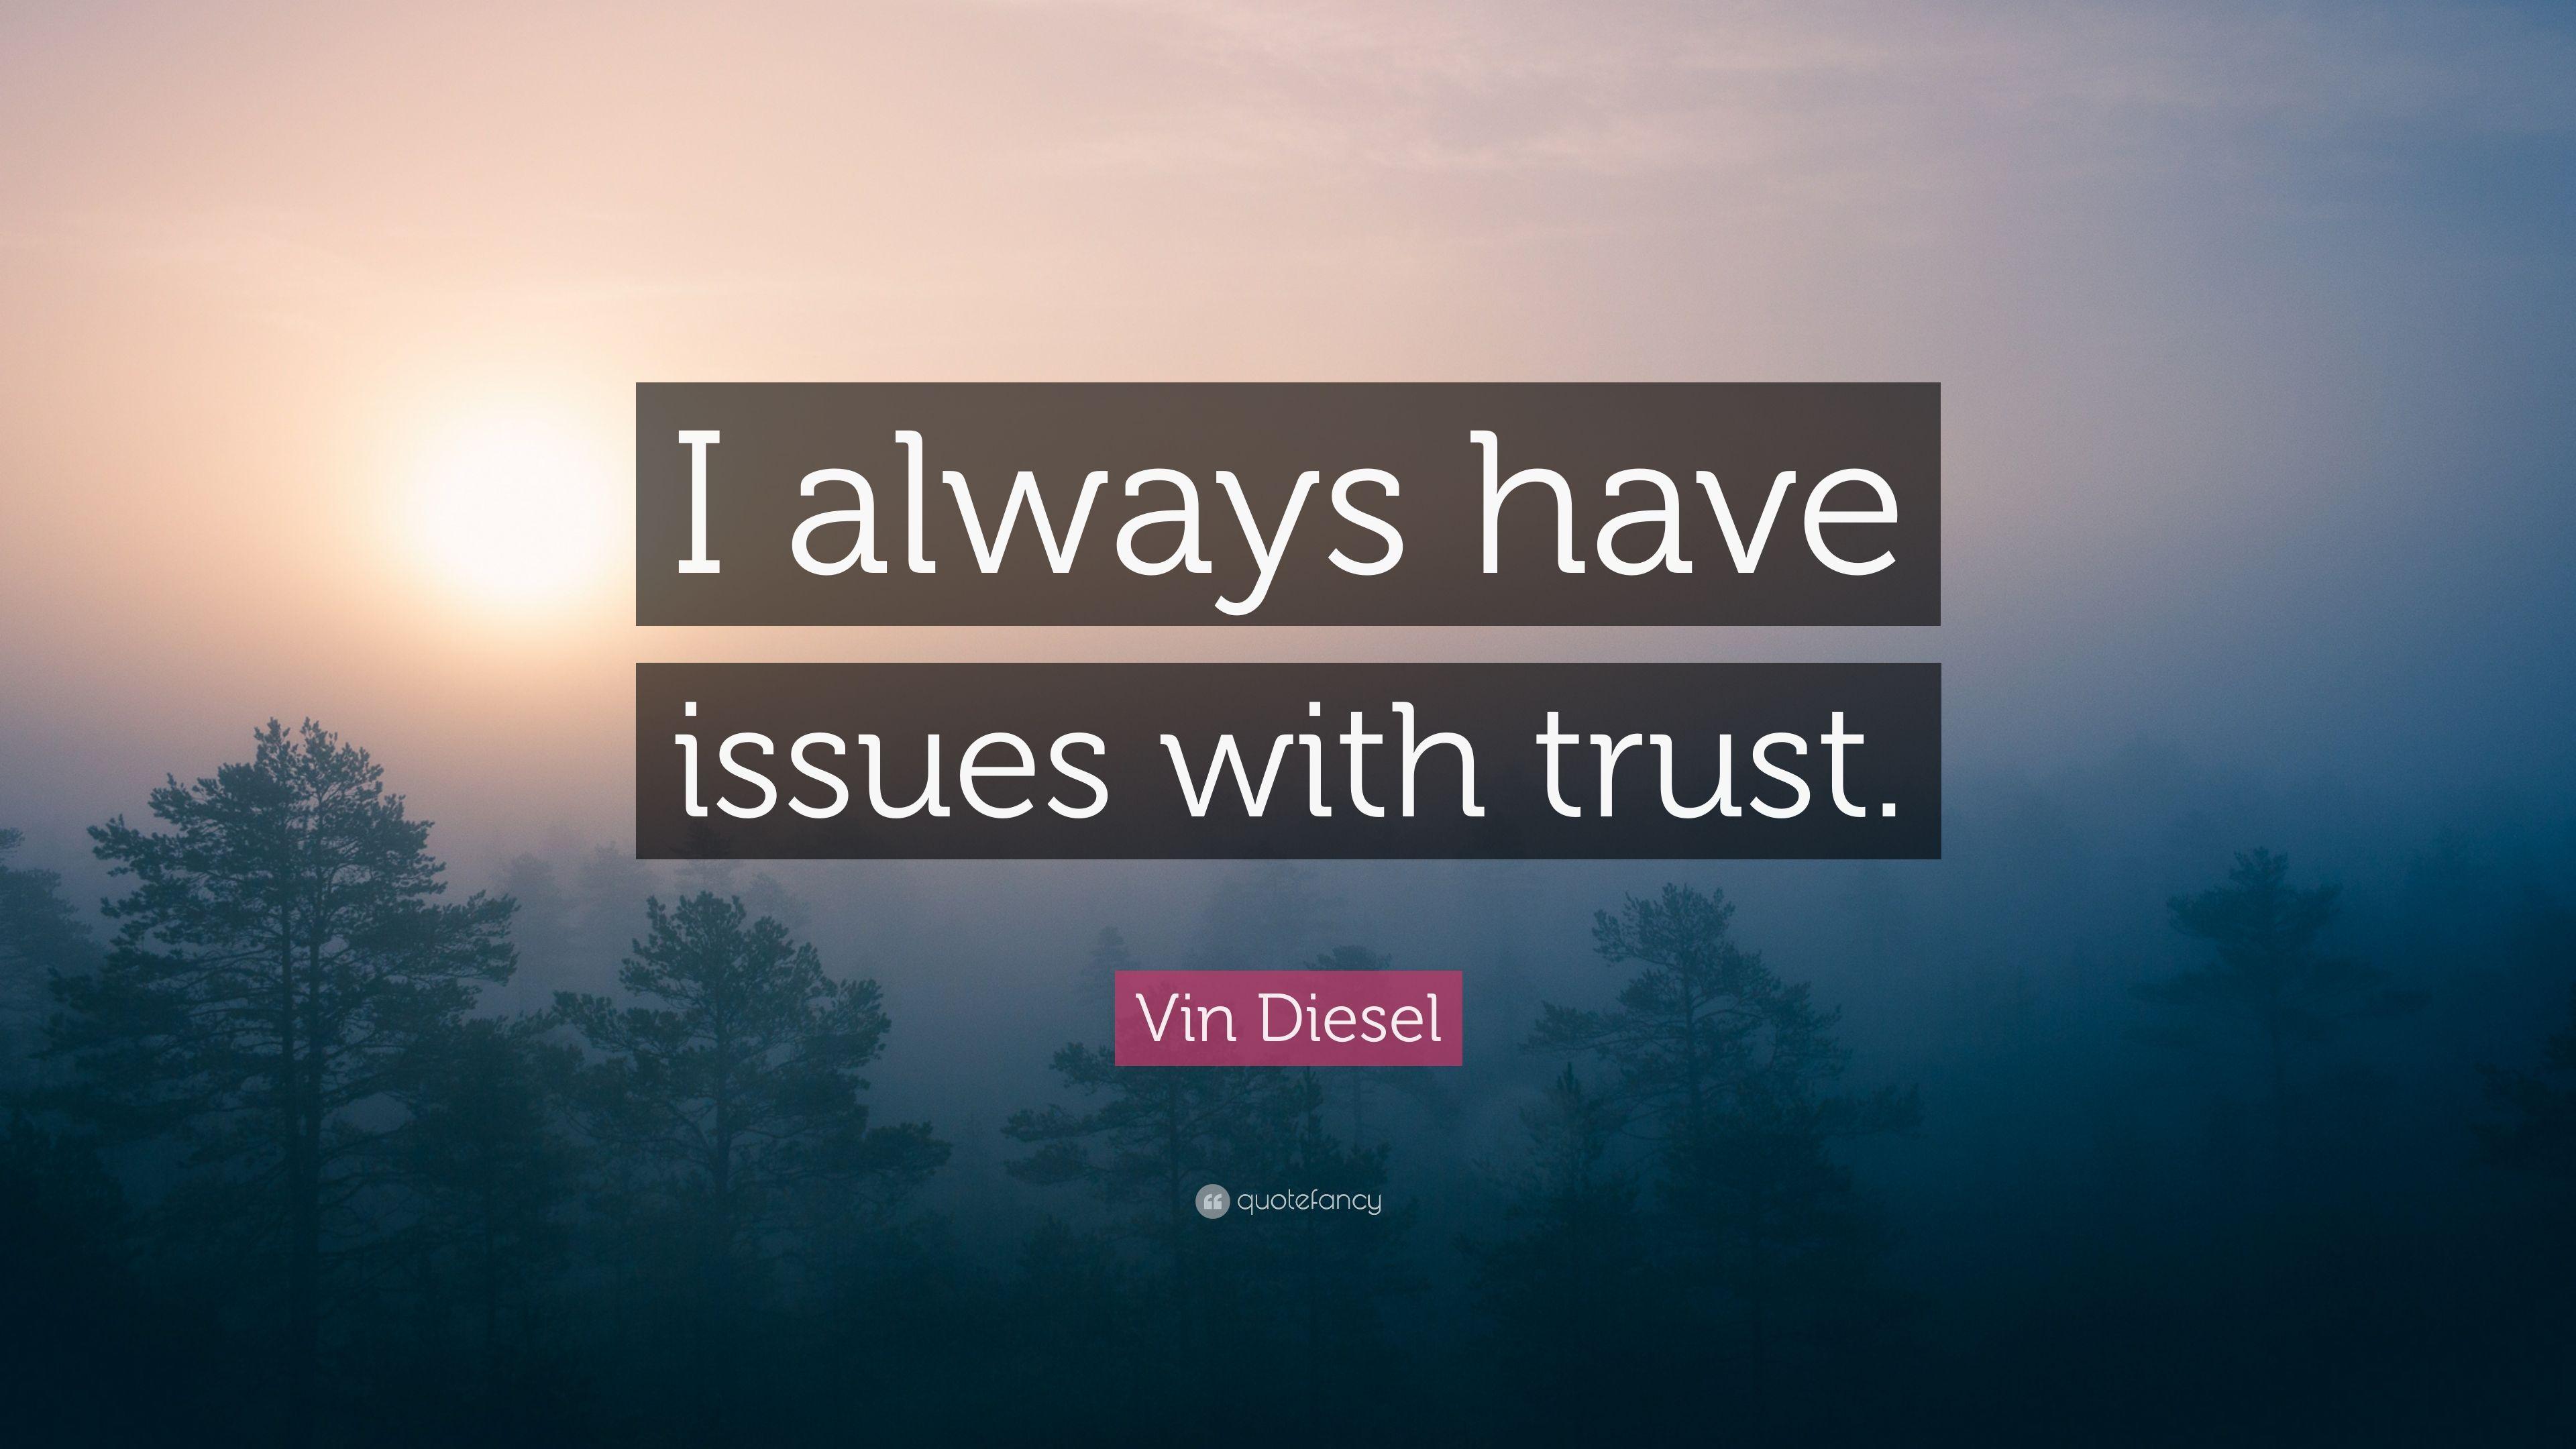 Vin Diesel Quote: “I always have issues with trust.”